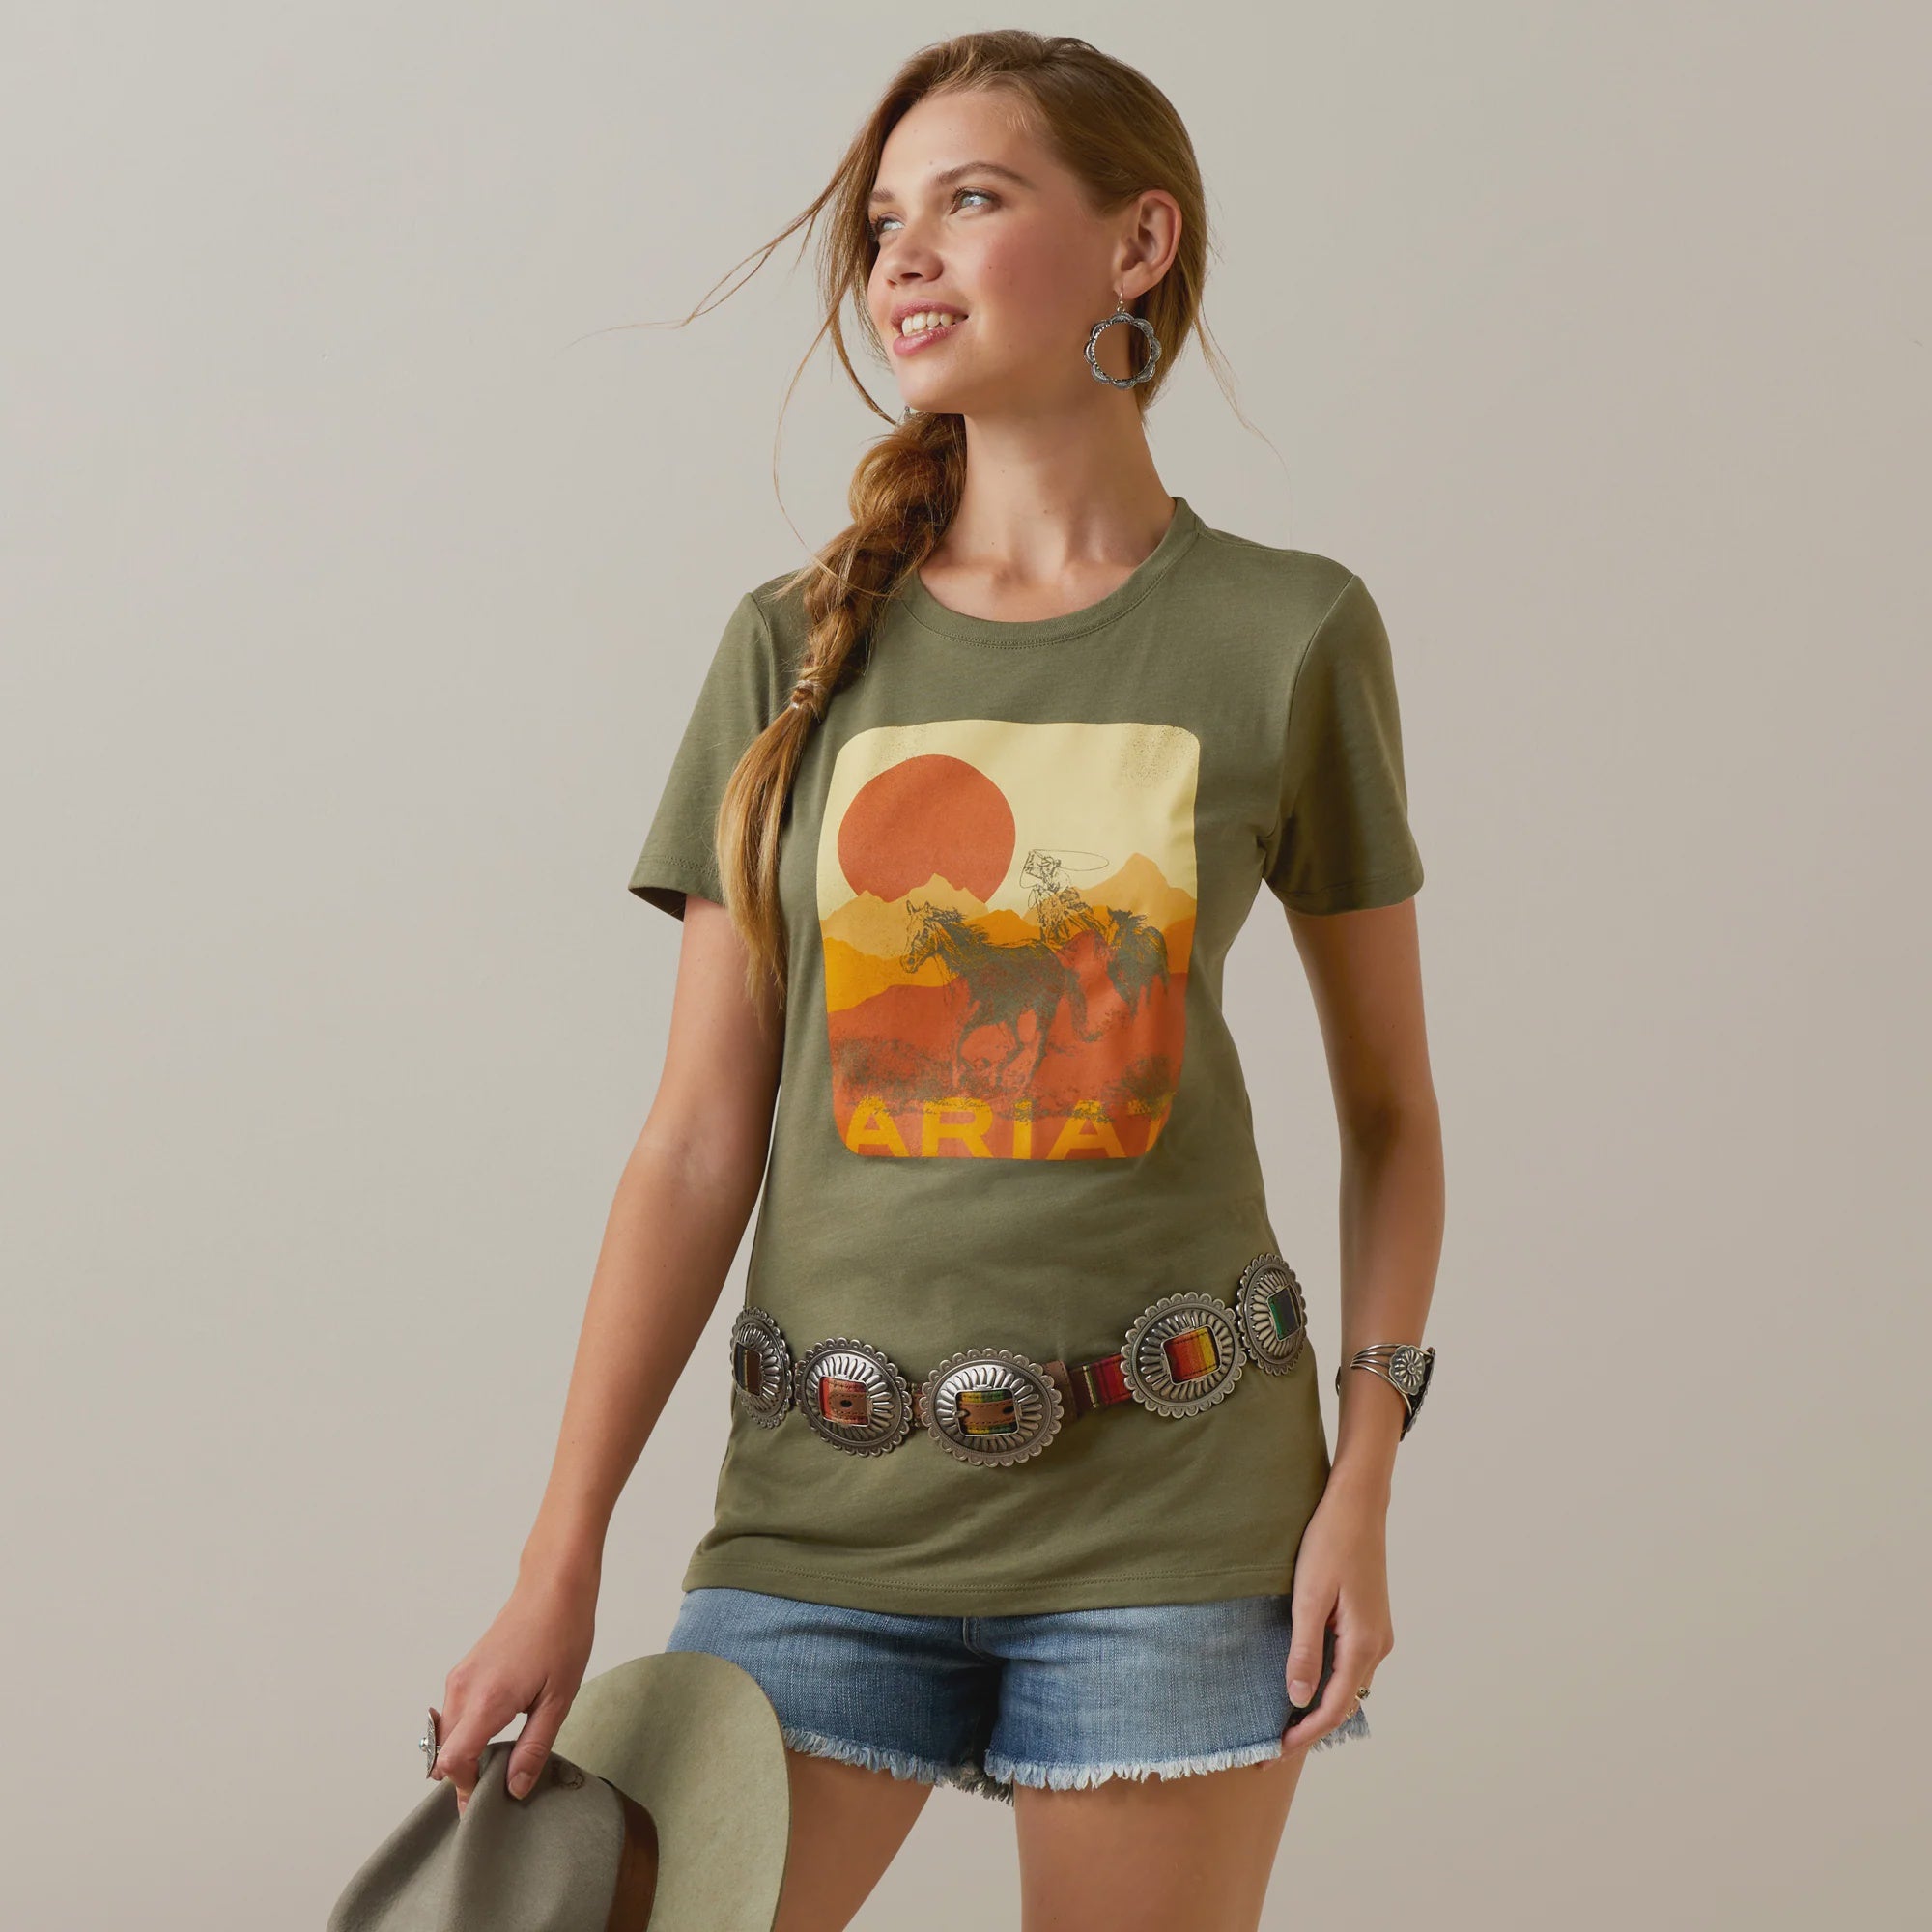 Womens Ariat Mustand Fever Tee Tshirt - Military (6910001479757)